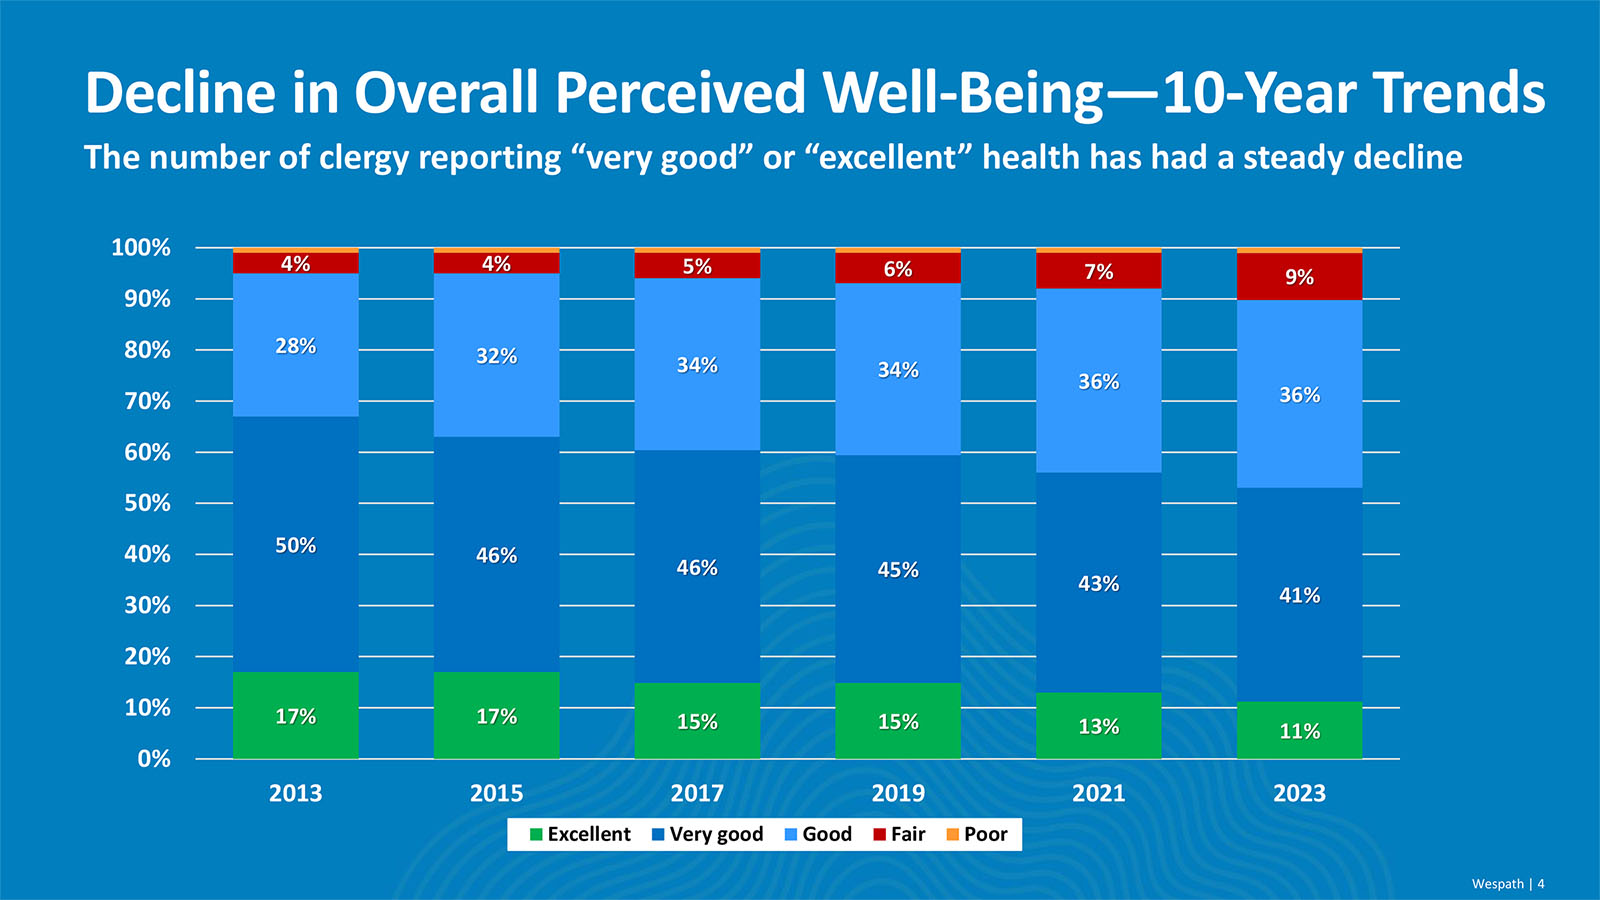 "Decline in Overall Perceived Well-Being — 10-Year Trends" Courtesy image